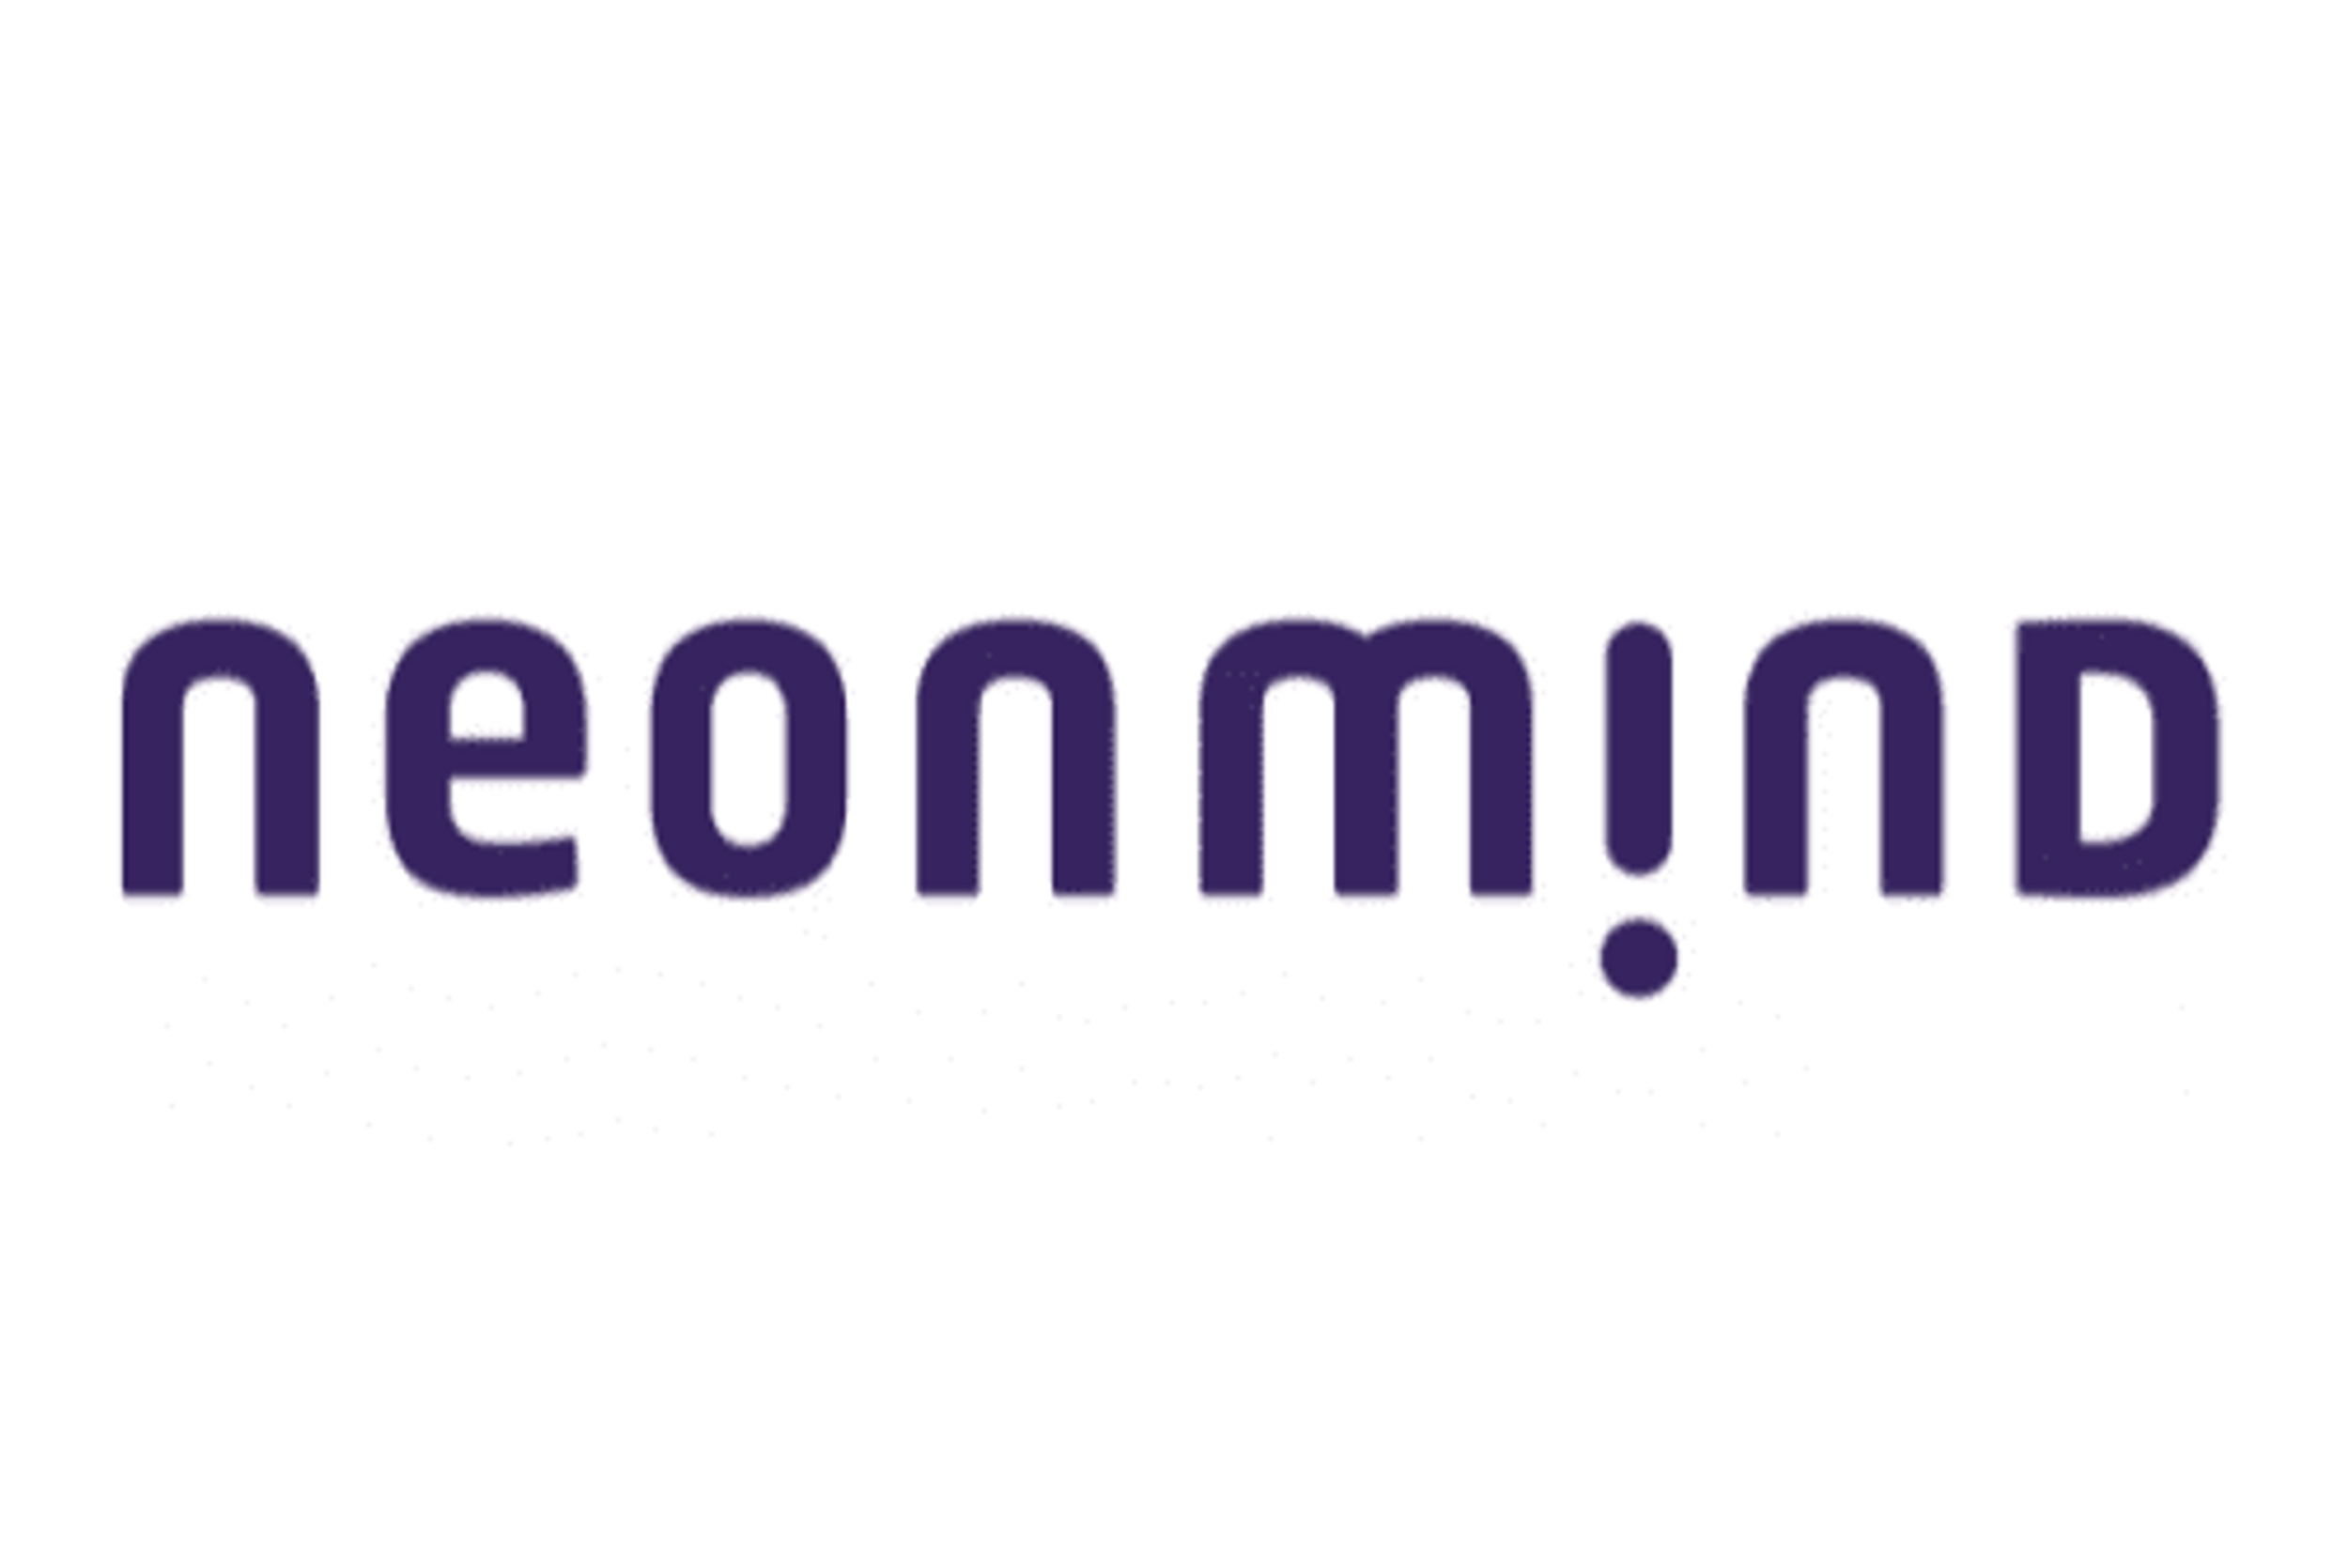 NeonMind To Improve Patient Care and Data Management by Adopting Digital Platform for Ketamine Treatments in Preparation of Opening Its Inaugural Specialty Mental Health Clinic